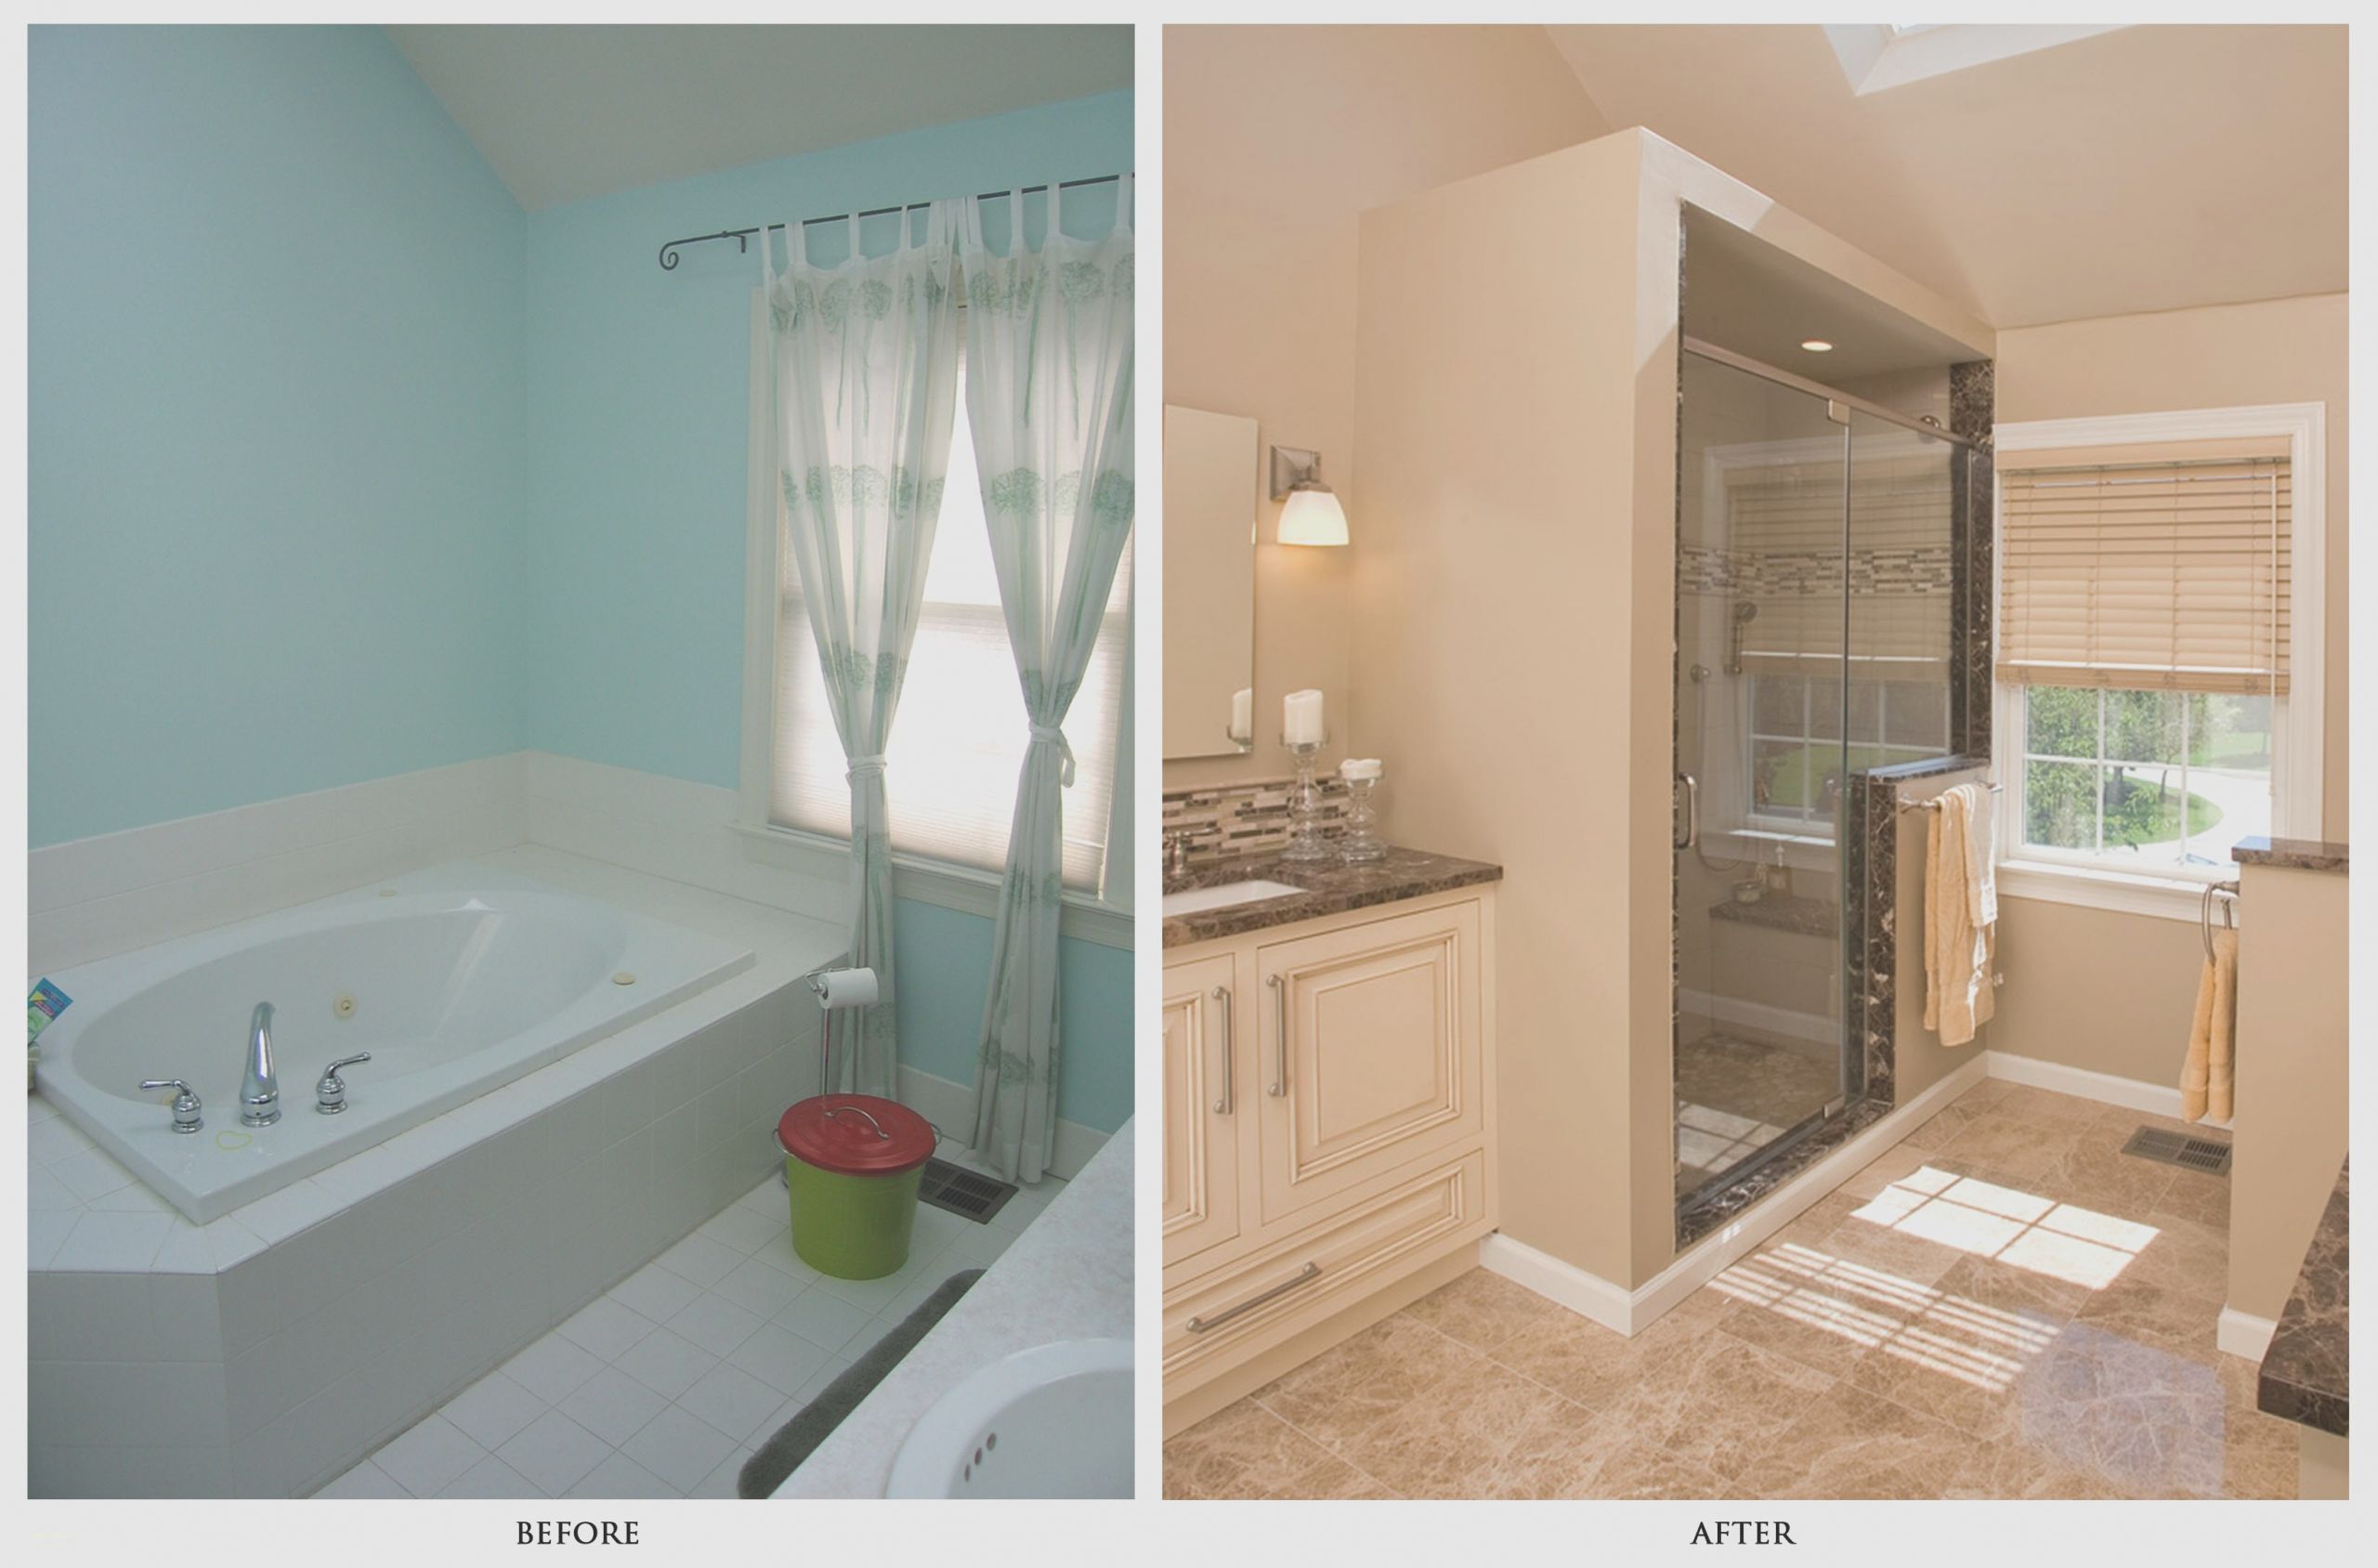 Bathroom Remodel Before And After
 15 New Small Rv Remodel Before and After Creative Maxx